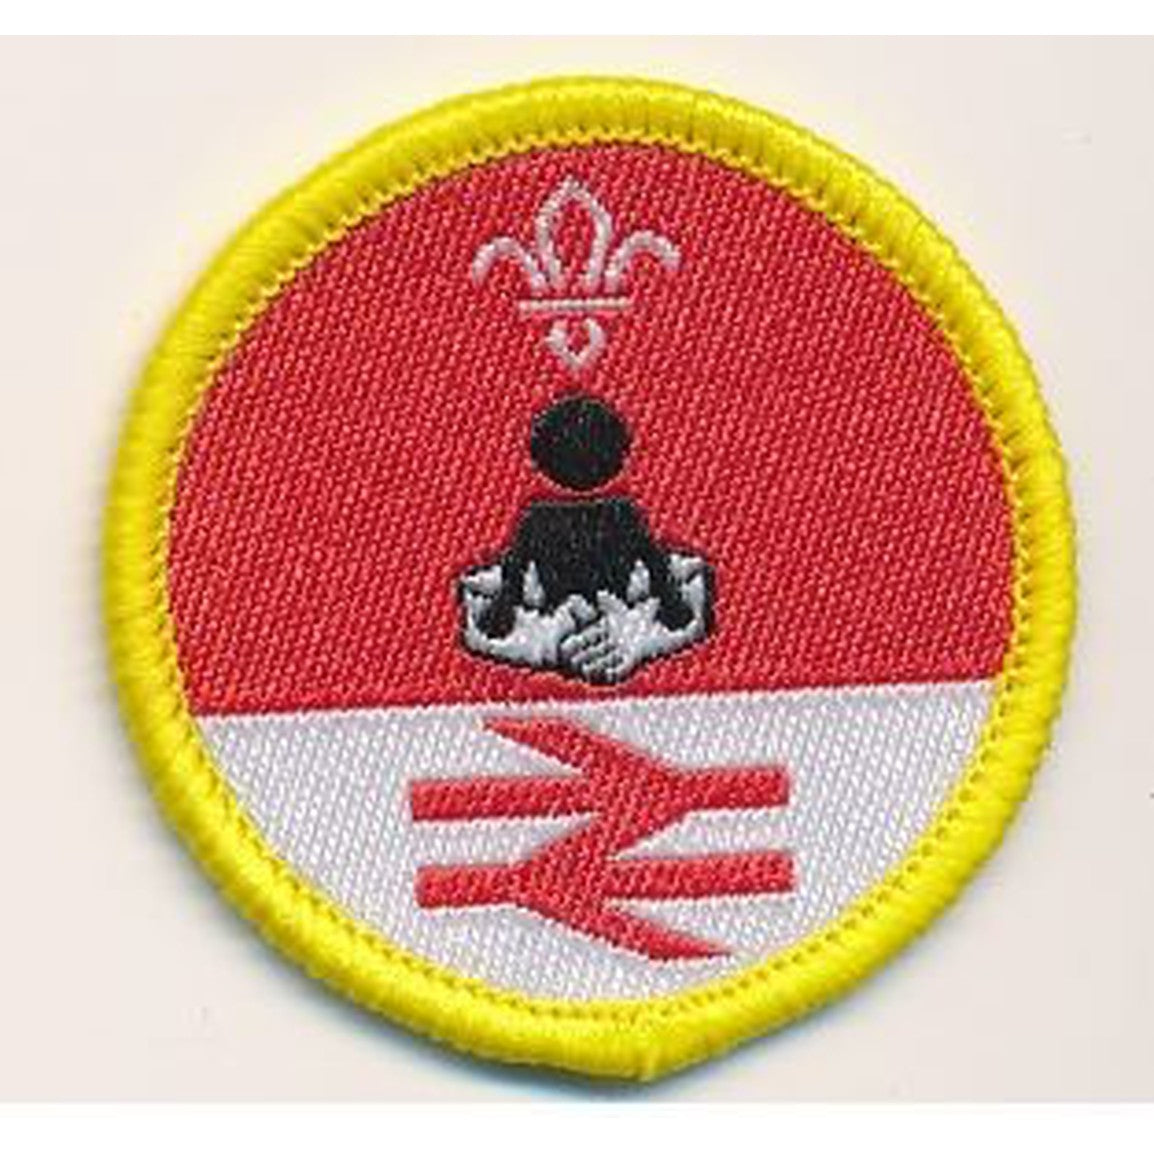 Cub Scout Personal Safety Activity Badge (Network Rail)